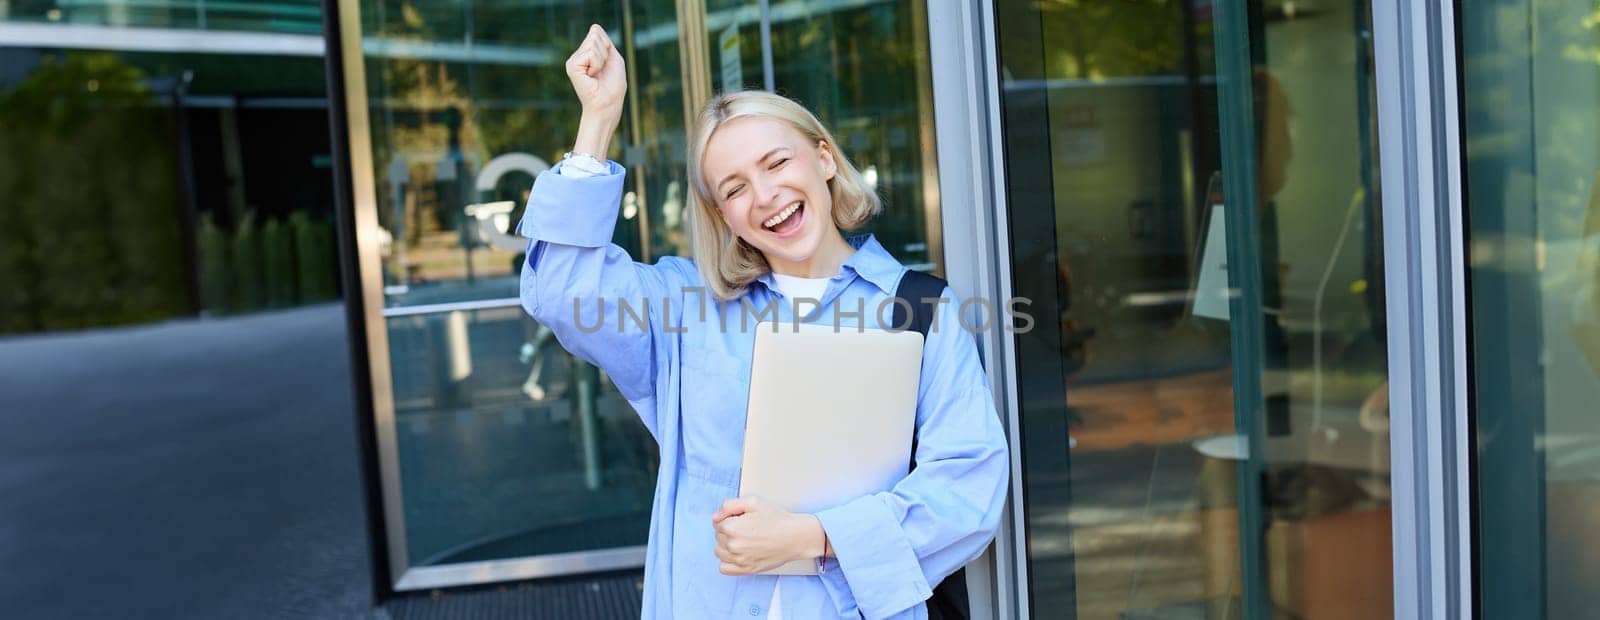 Carefree blond woman laughing, smiling and celebrating, posing with laptop near office, campus building, raising hand up in triumph, feeling excited by Benzoix